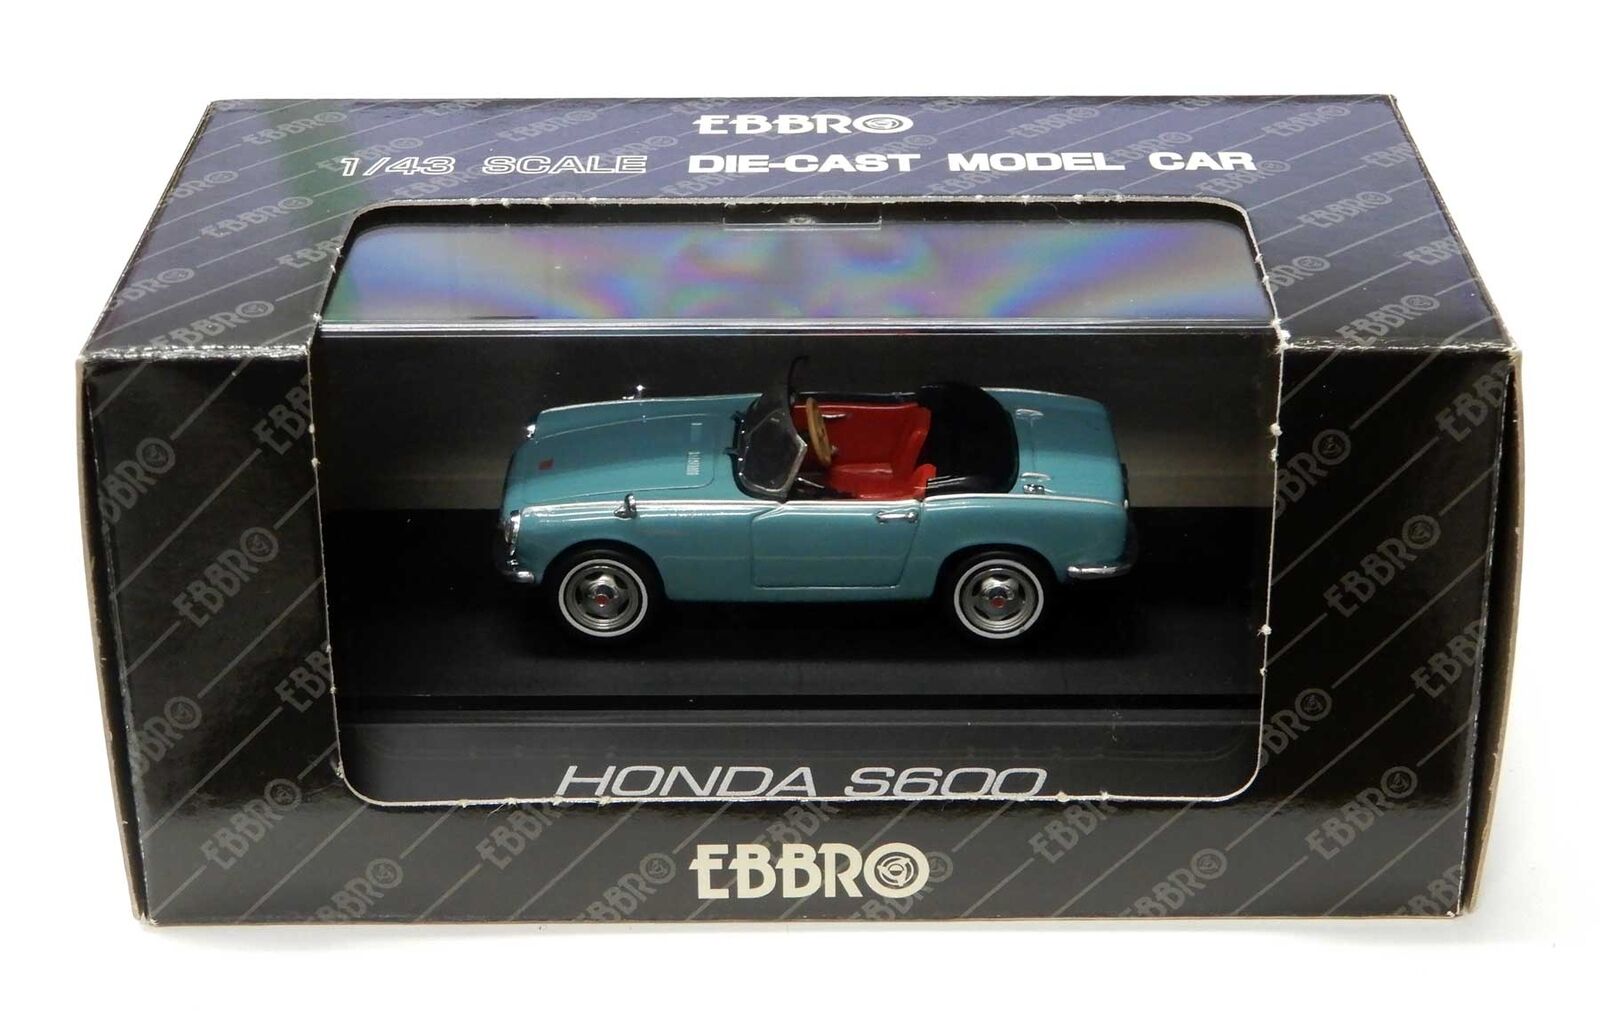 Scale Minicar 1/43 Ebbro Honda S600 C Outer Box Opened Case Damage / Due To The